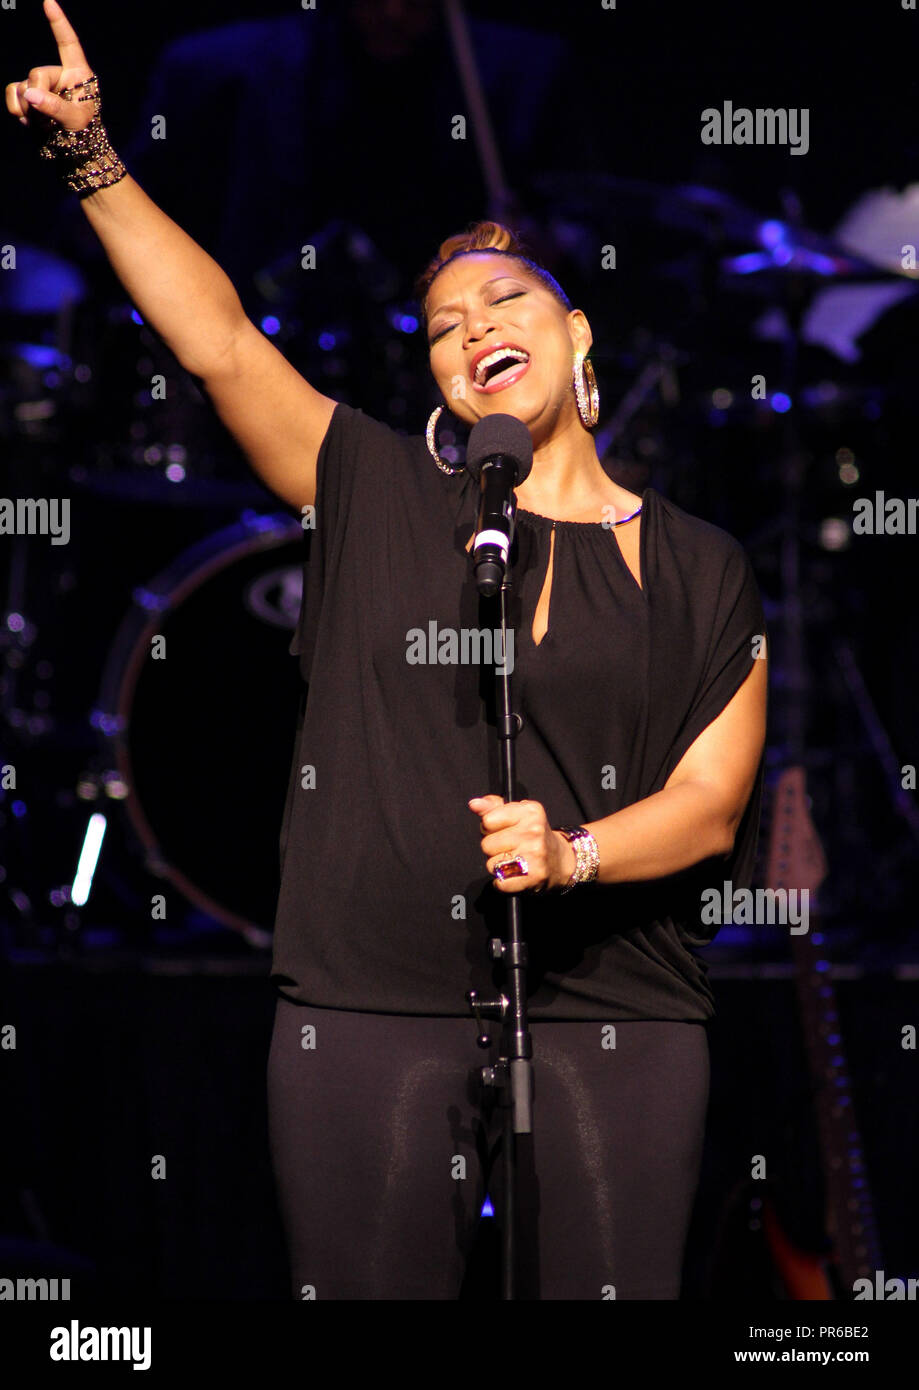 Queen Latifah performs in concert at the Raymond F. Kravis Center in West Palm Beach, Florida on March 24, 2013. Stock Photo